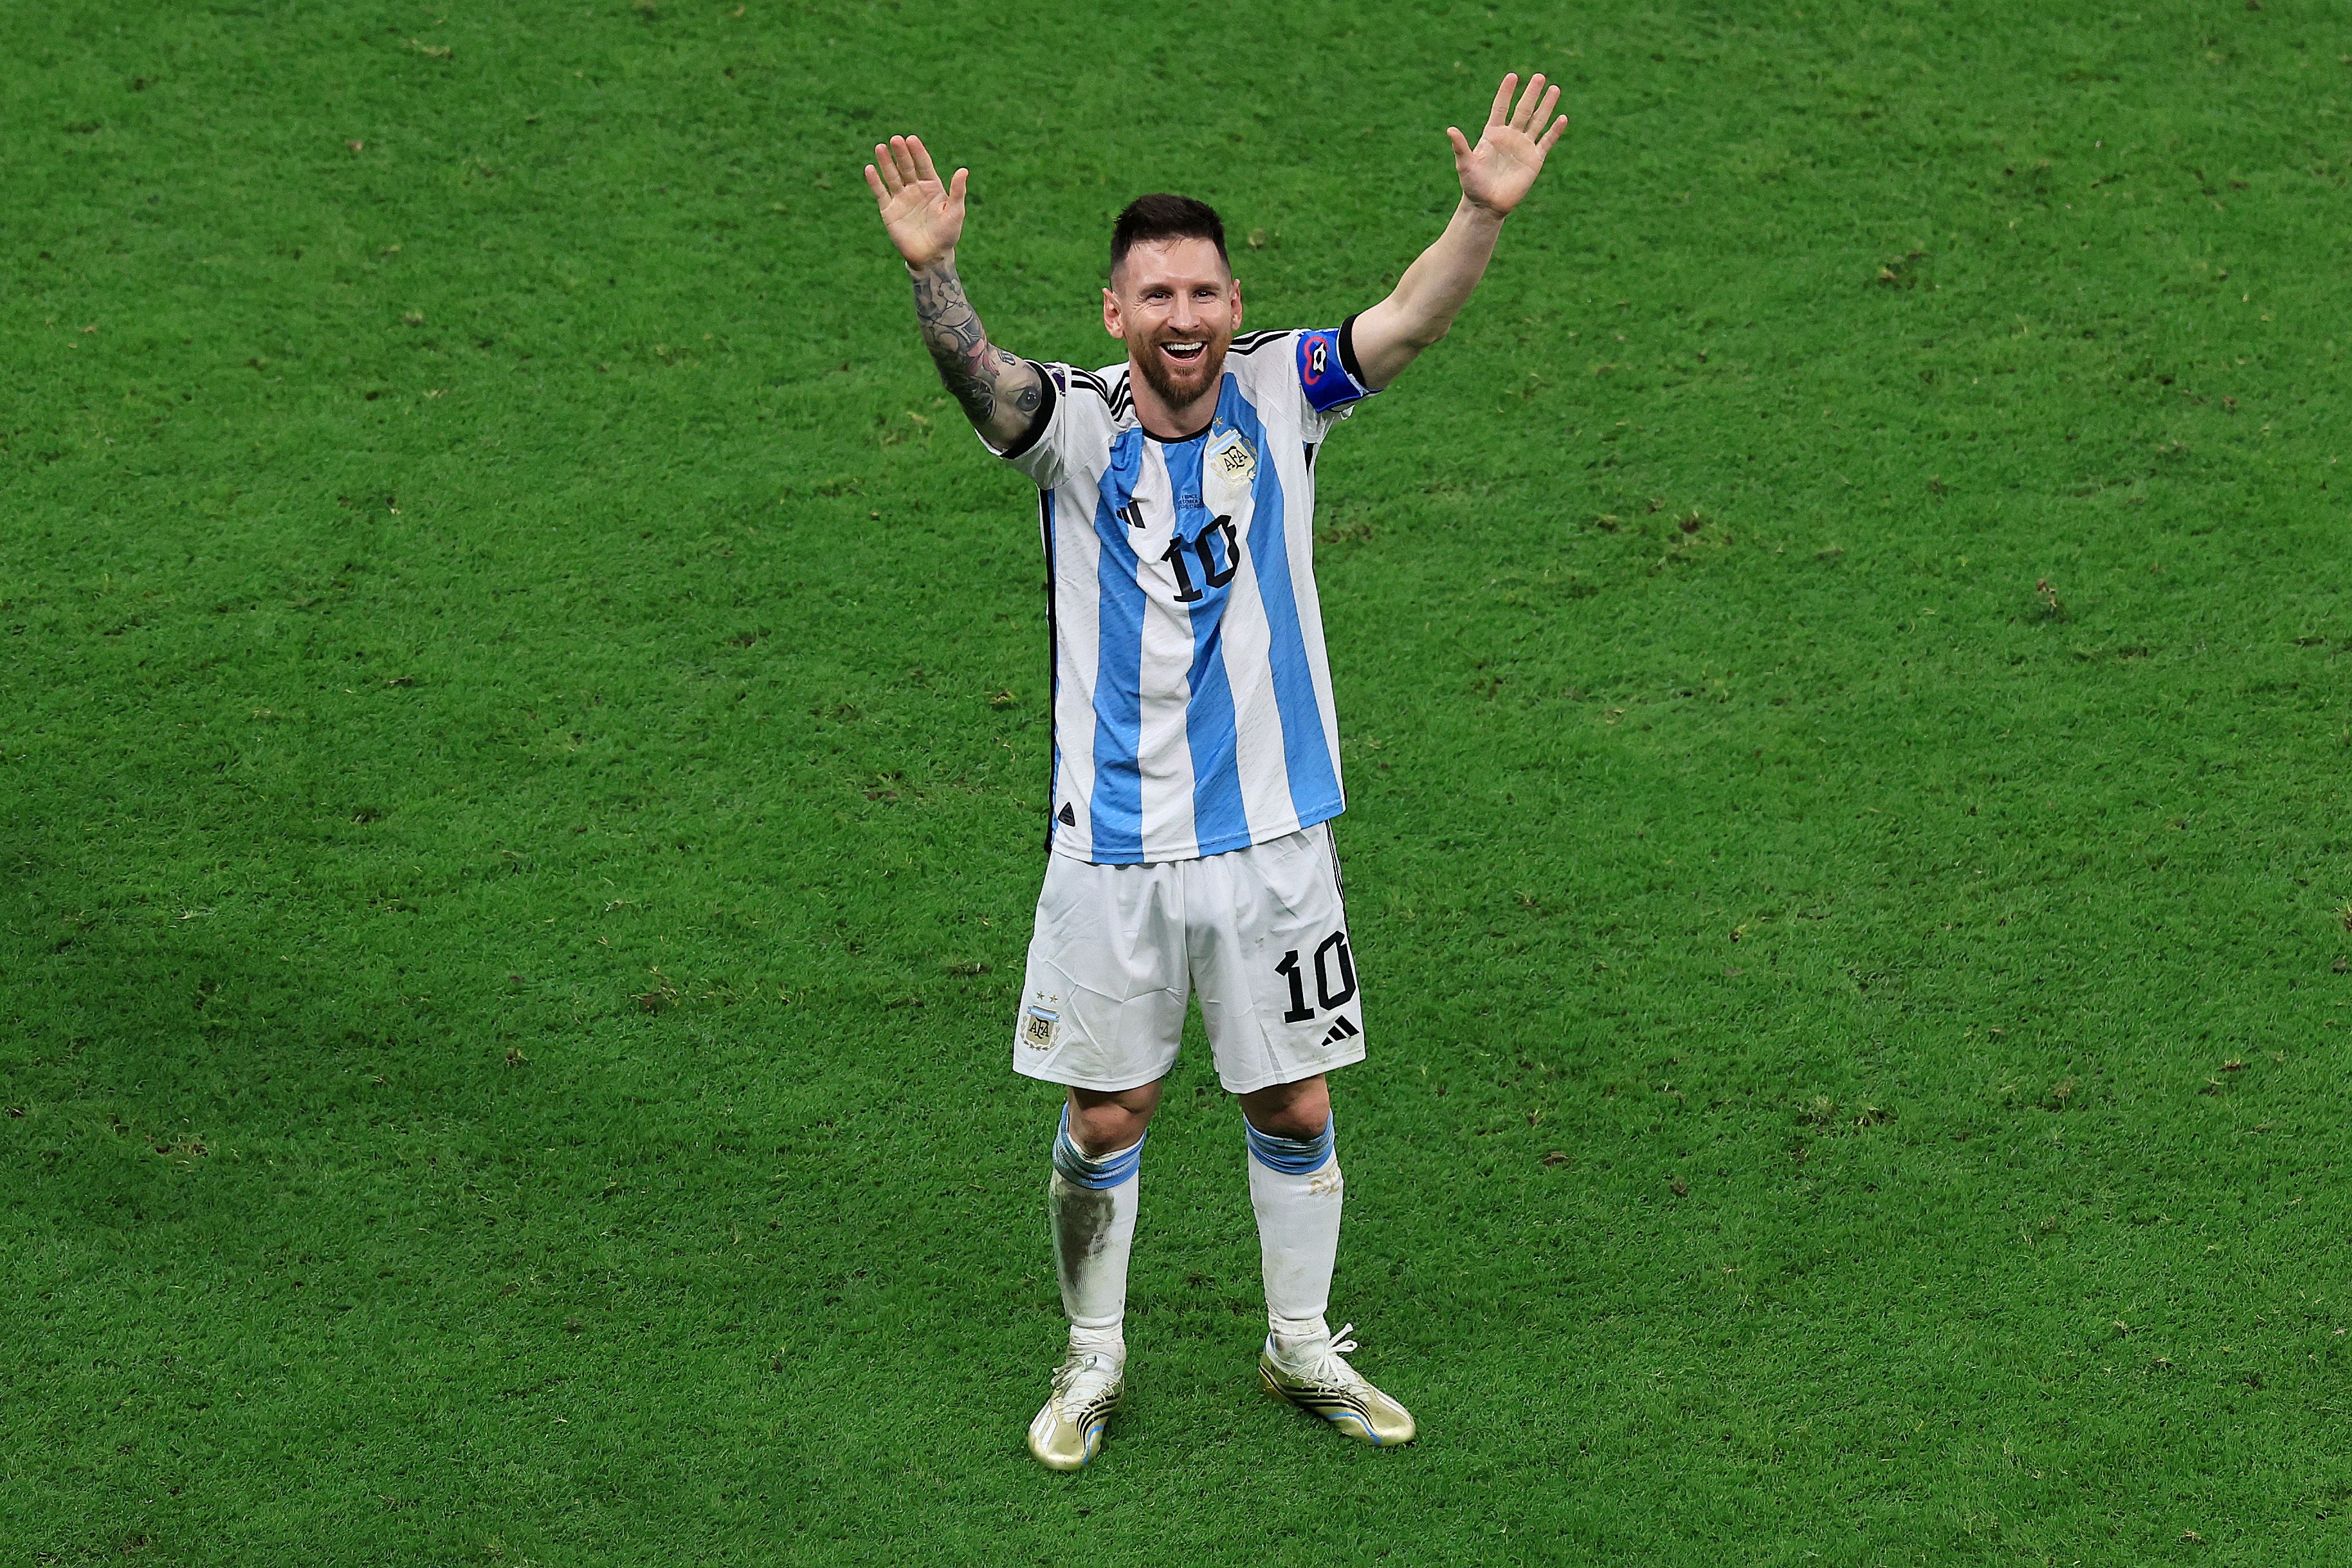 Lionel Messi after winning the World Cup